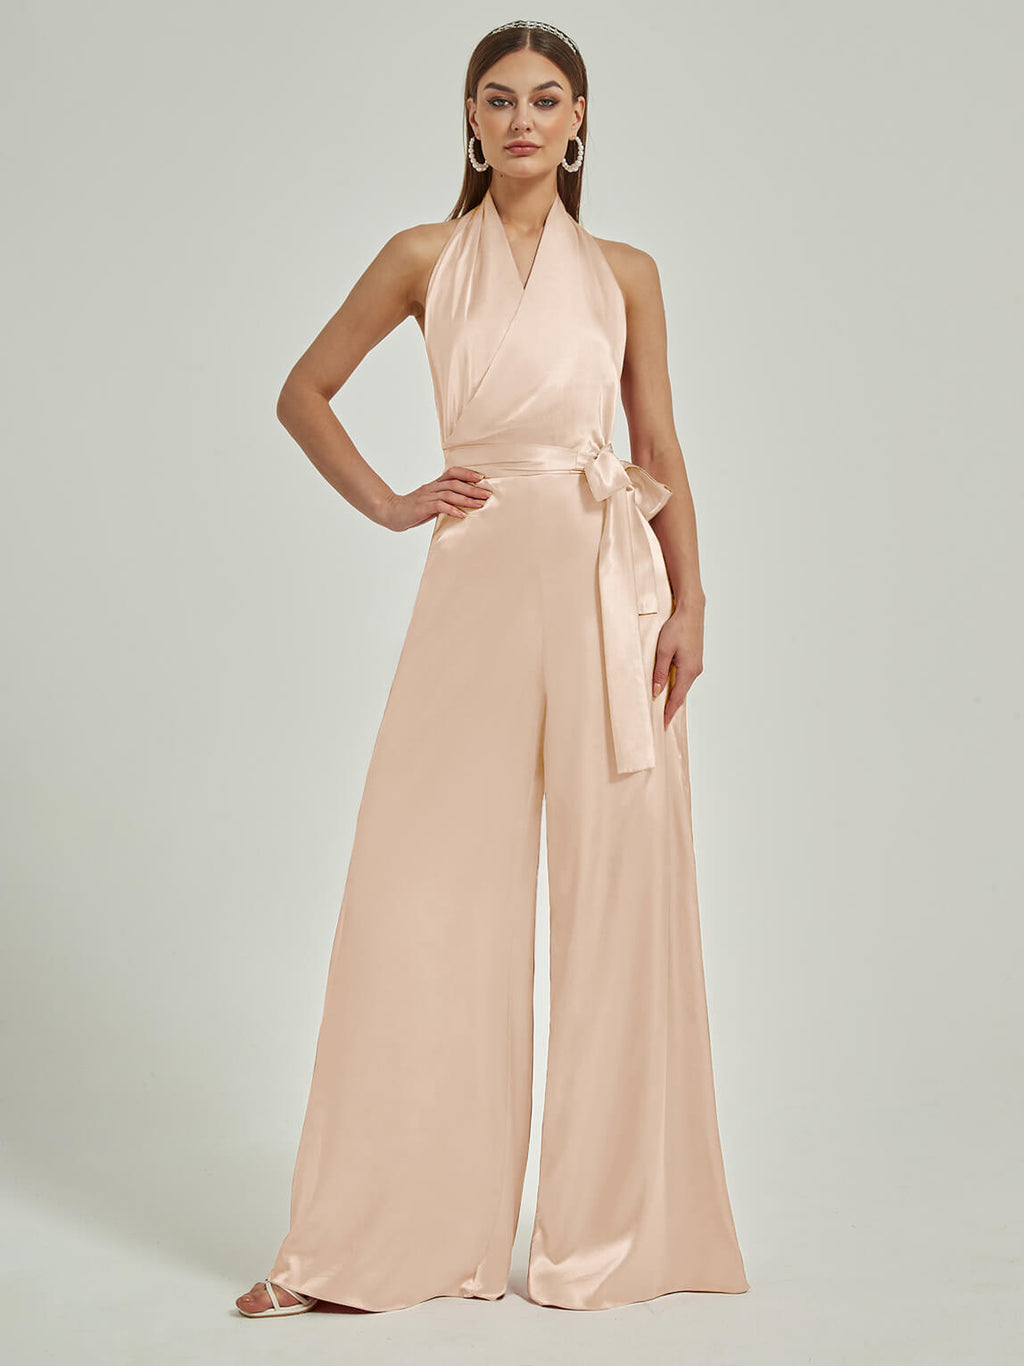 NZ Bridal Champagne Halter Satin Rompers EB30S19 Poppy a